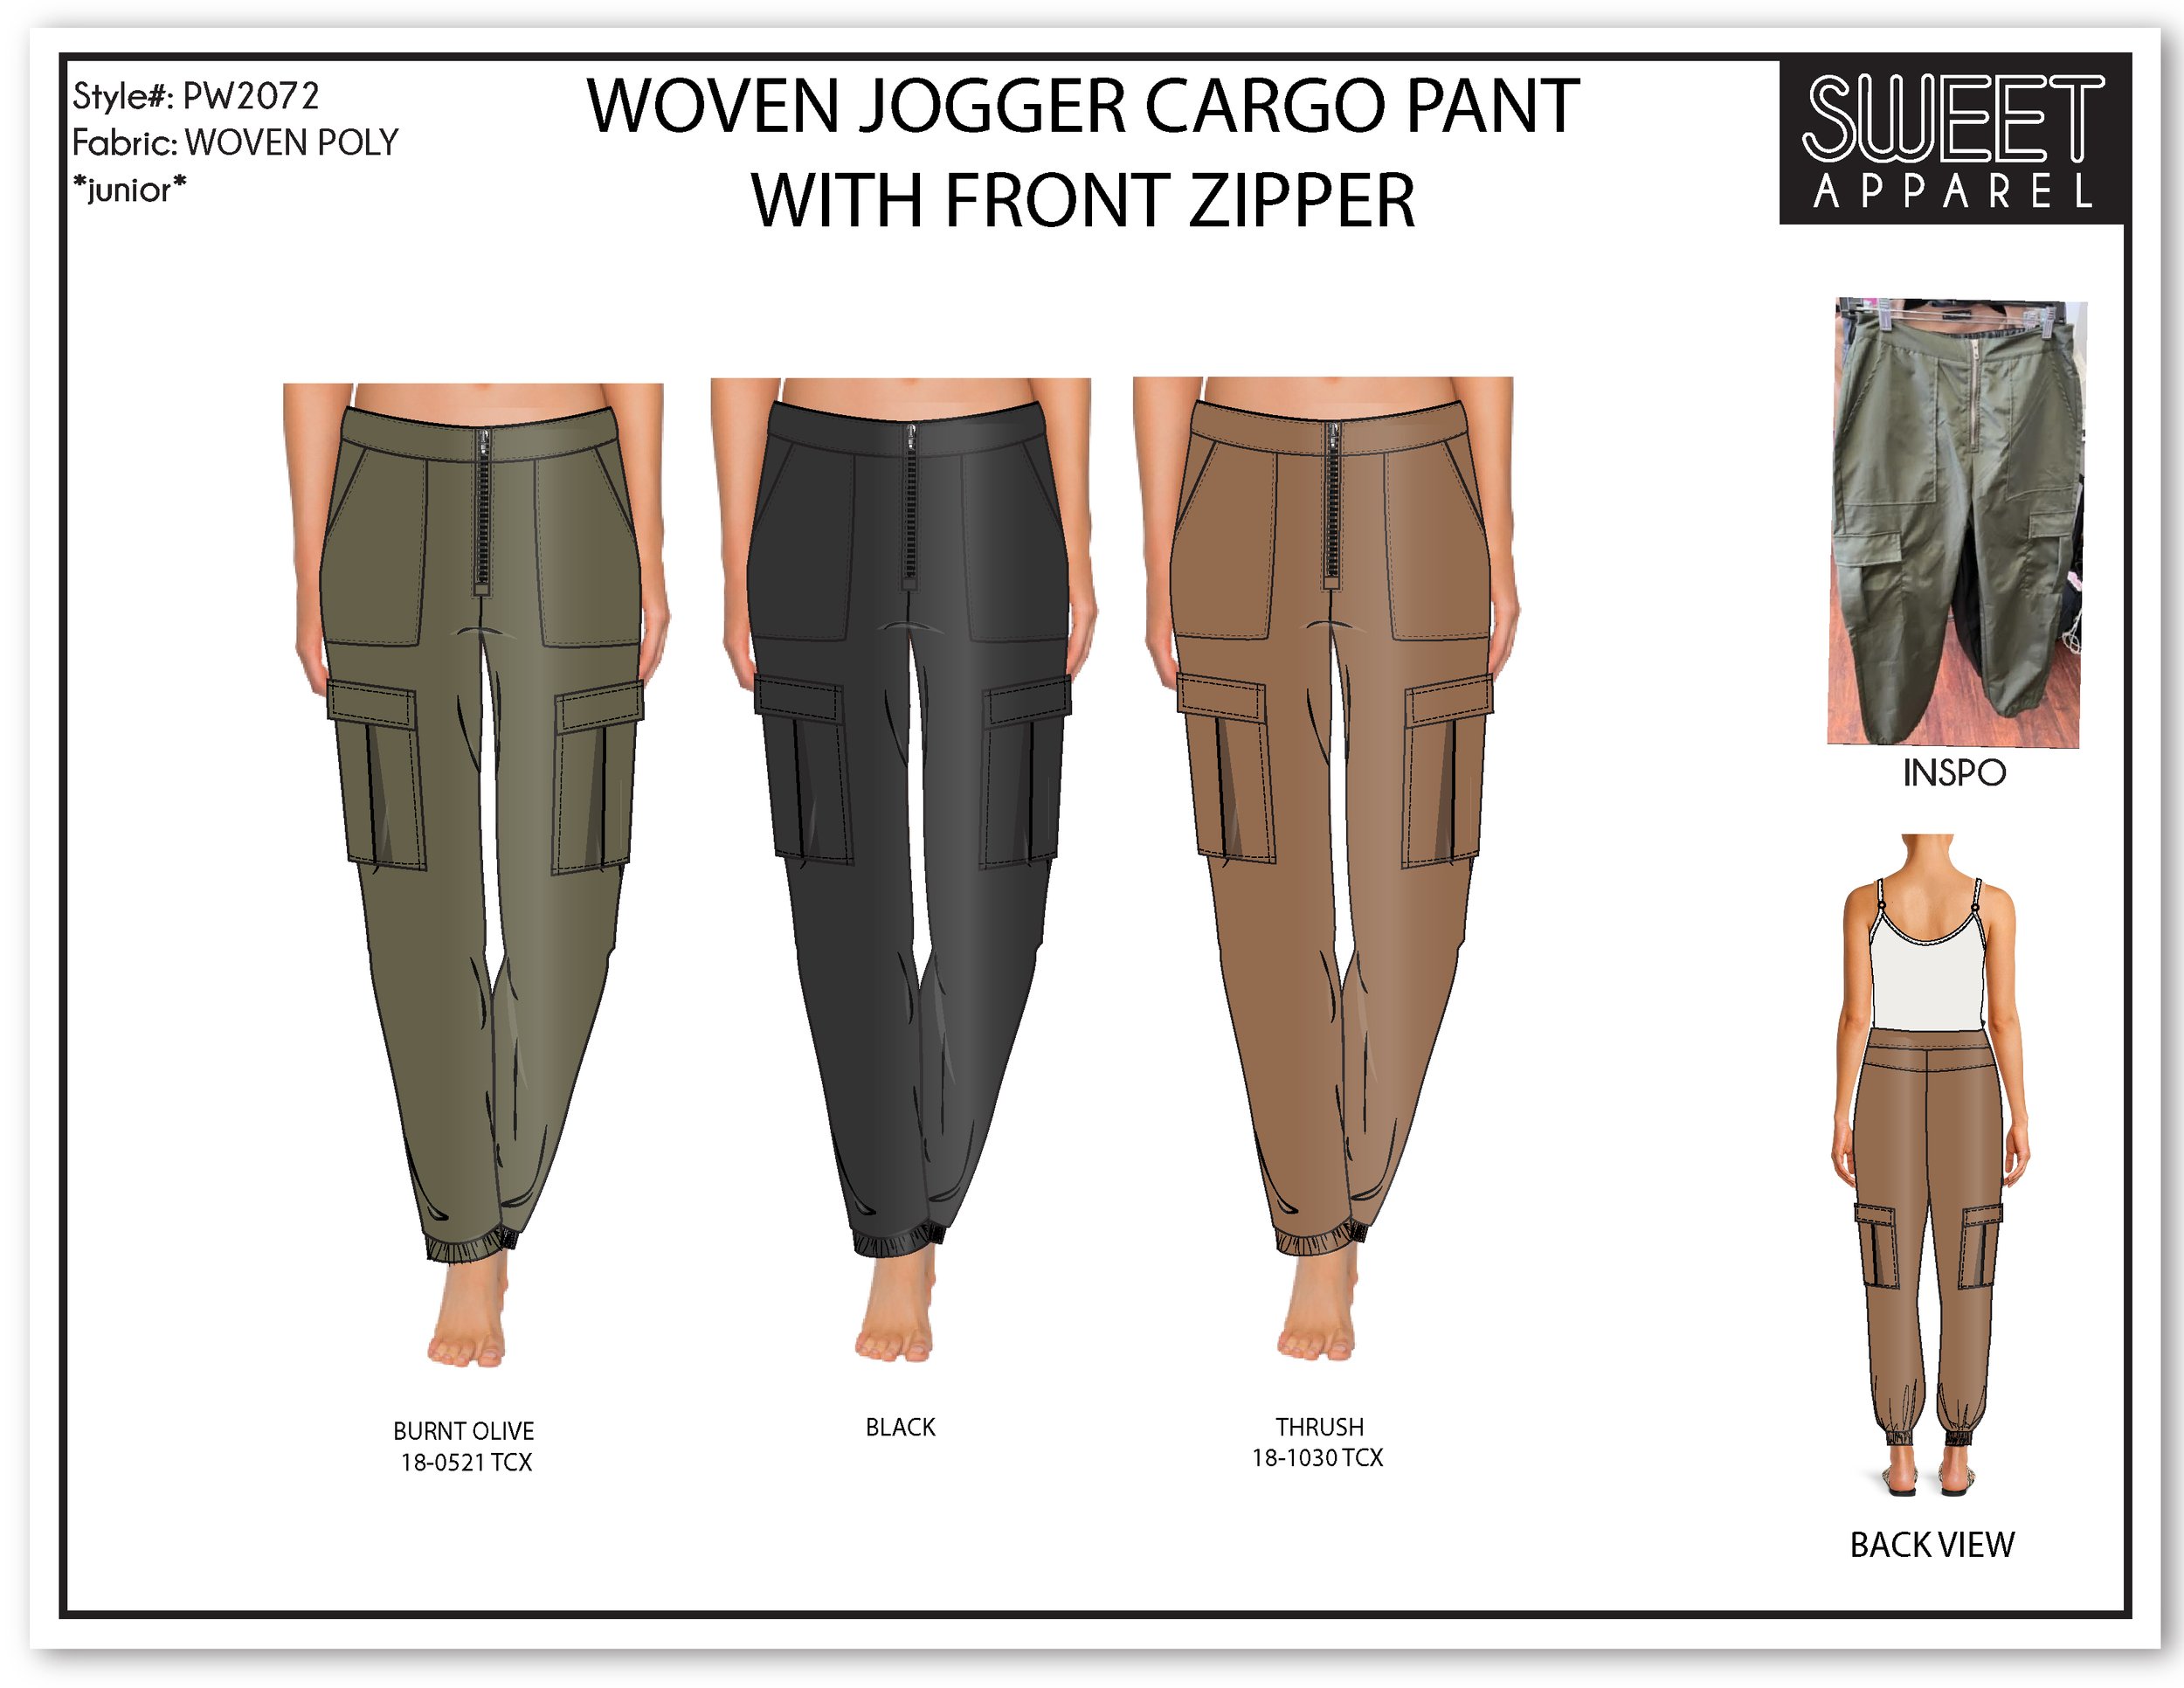 PW2072 WOVEN JOGGER CARGO PANT WITH FRONT ZIPPER-01.jpg